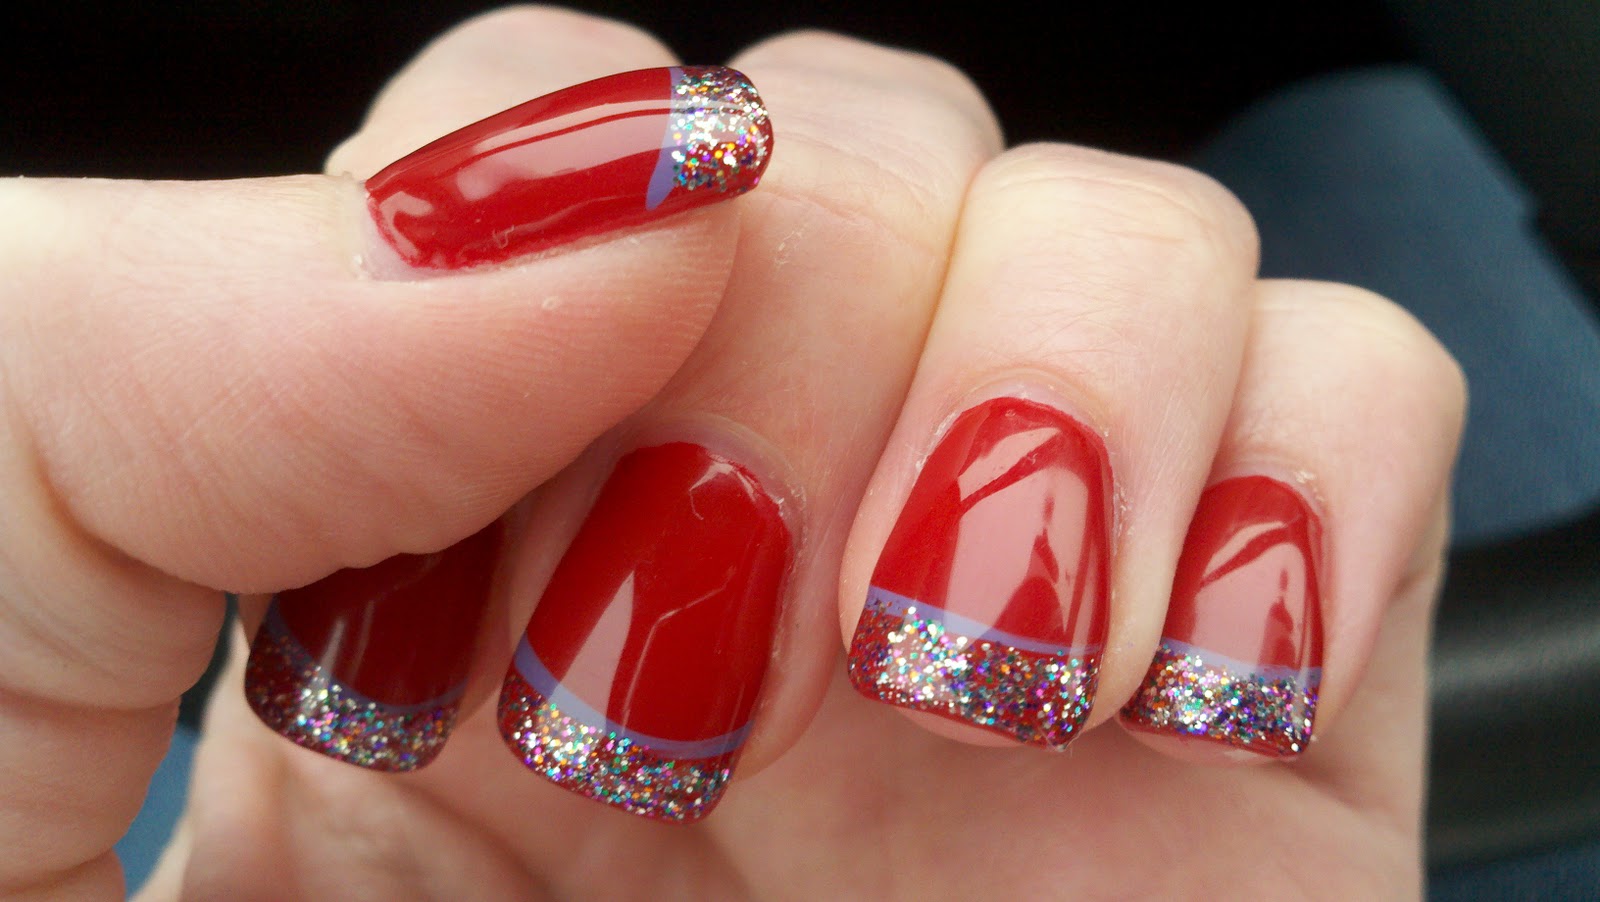 9. Creative Predefined Nail Art Designs for Christmas - wide 2